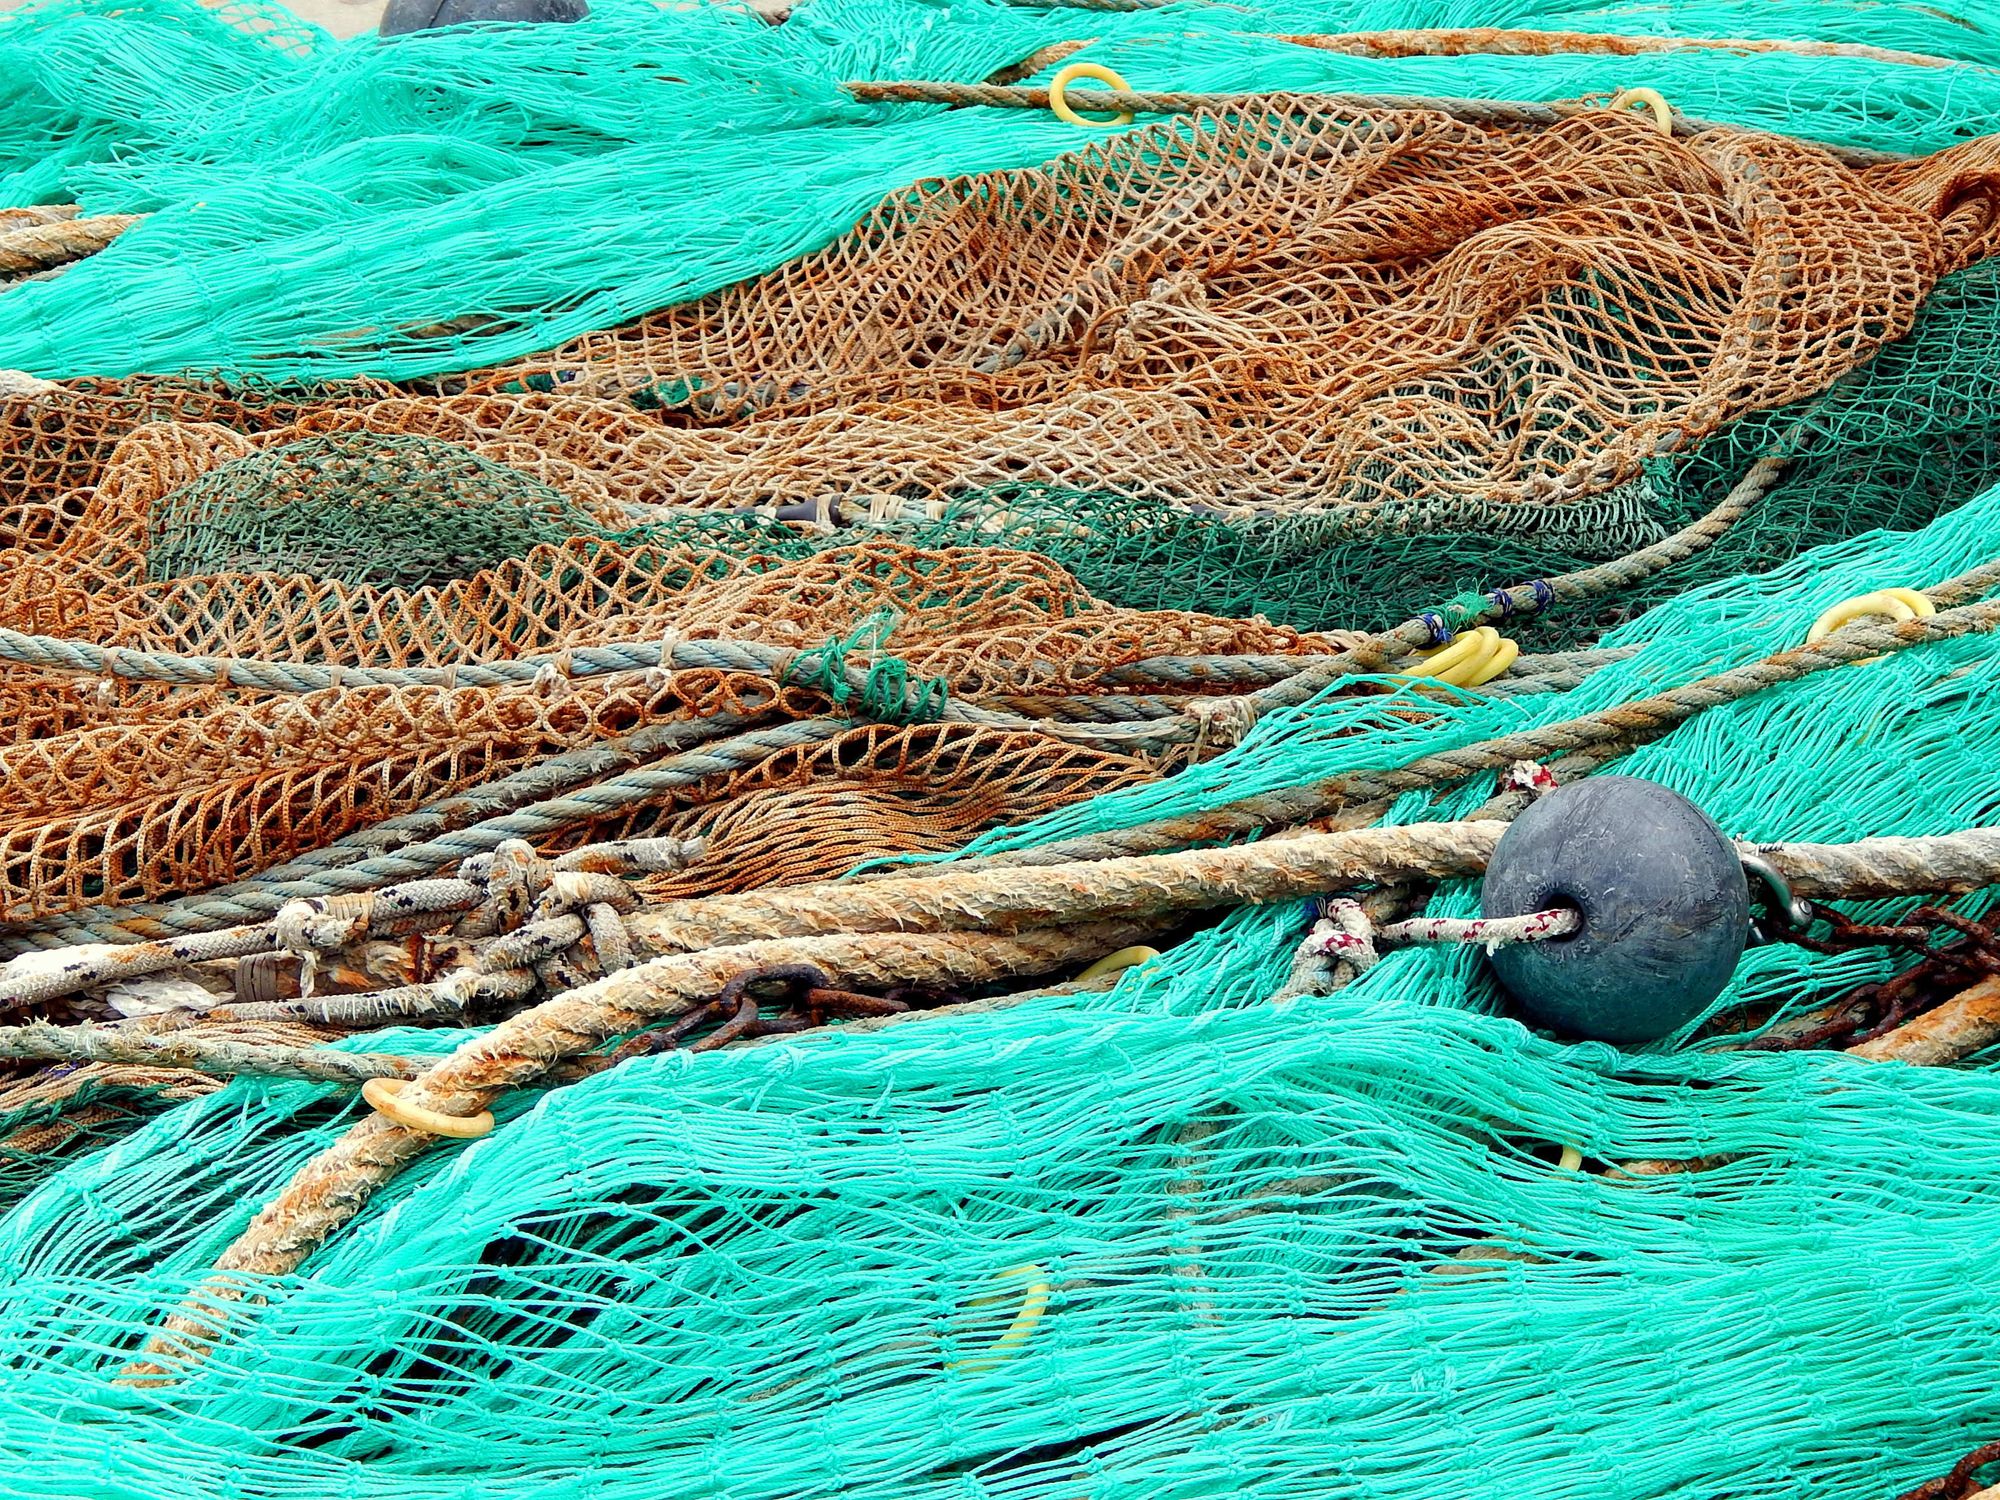 A global plastic treaty must include the fishing industry